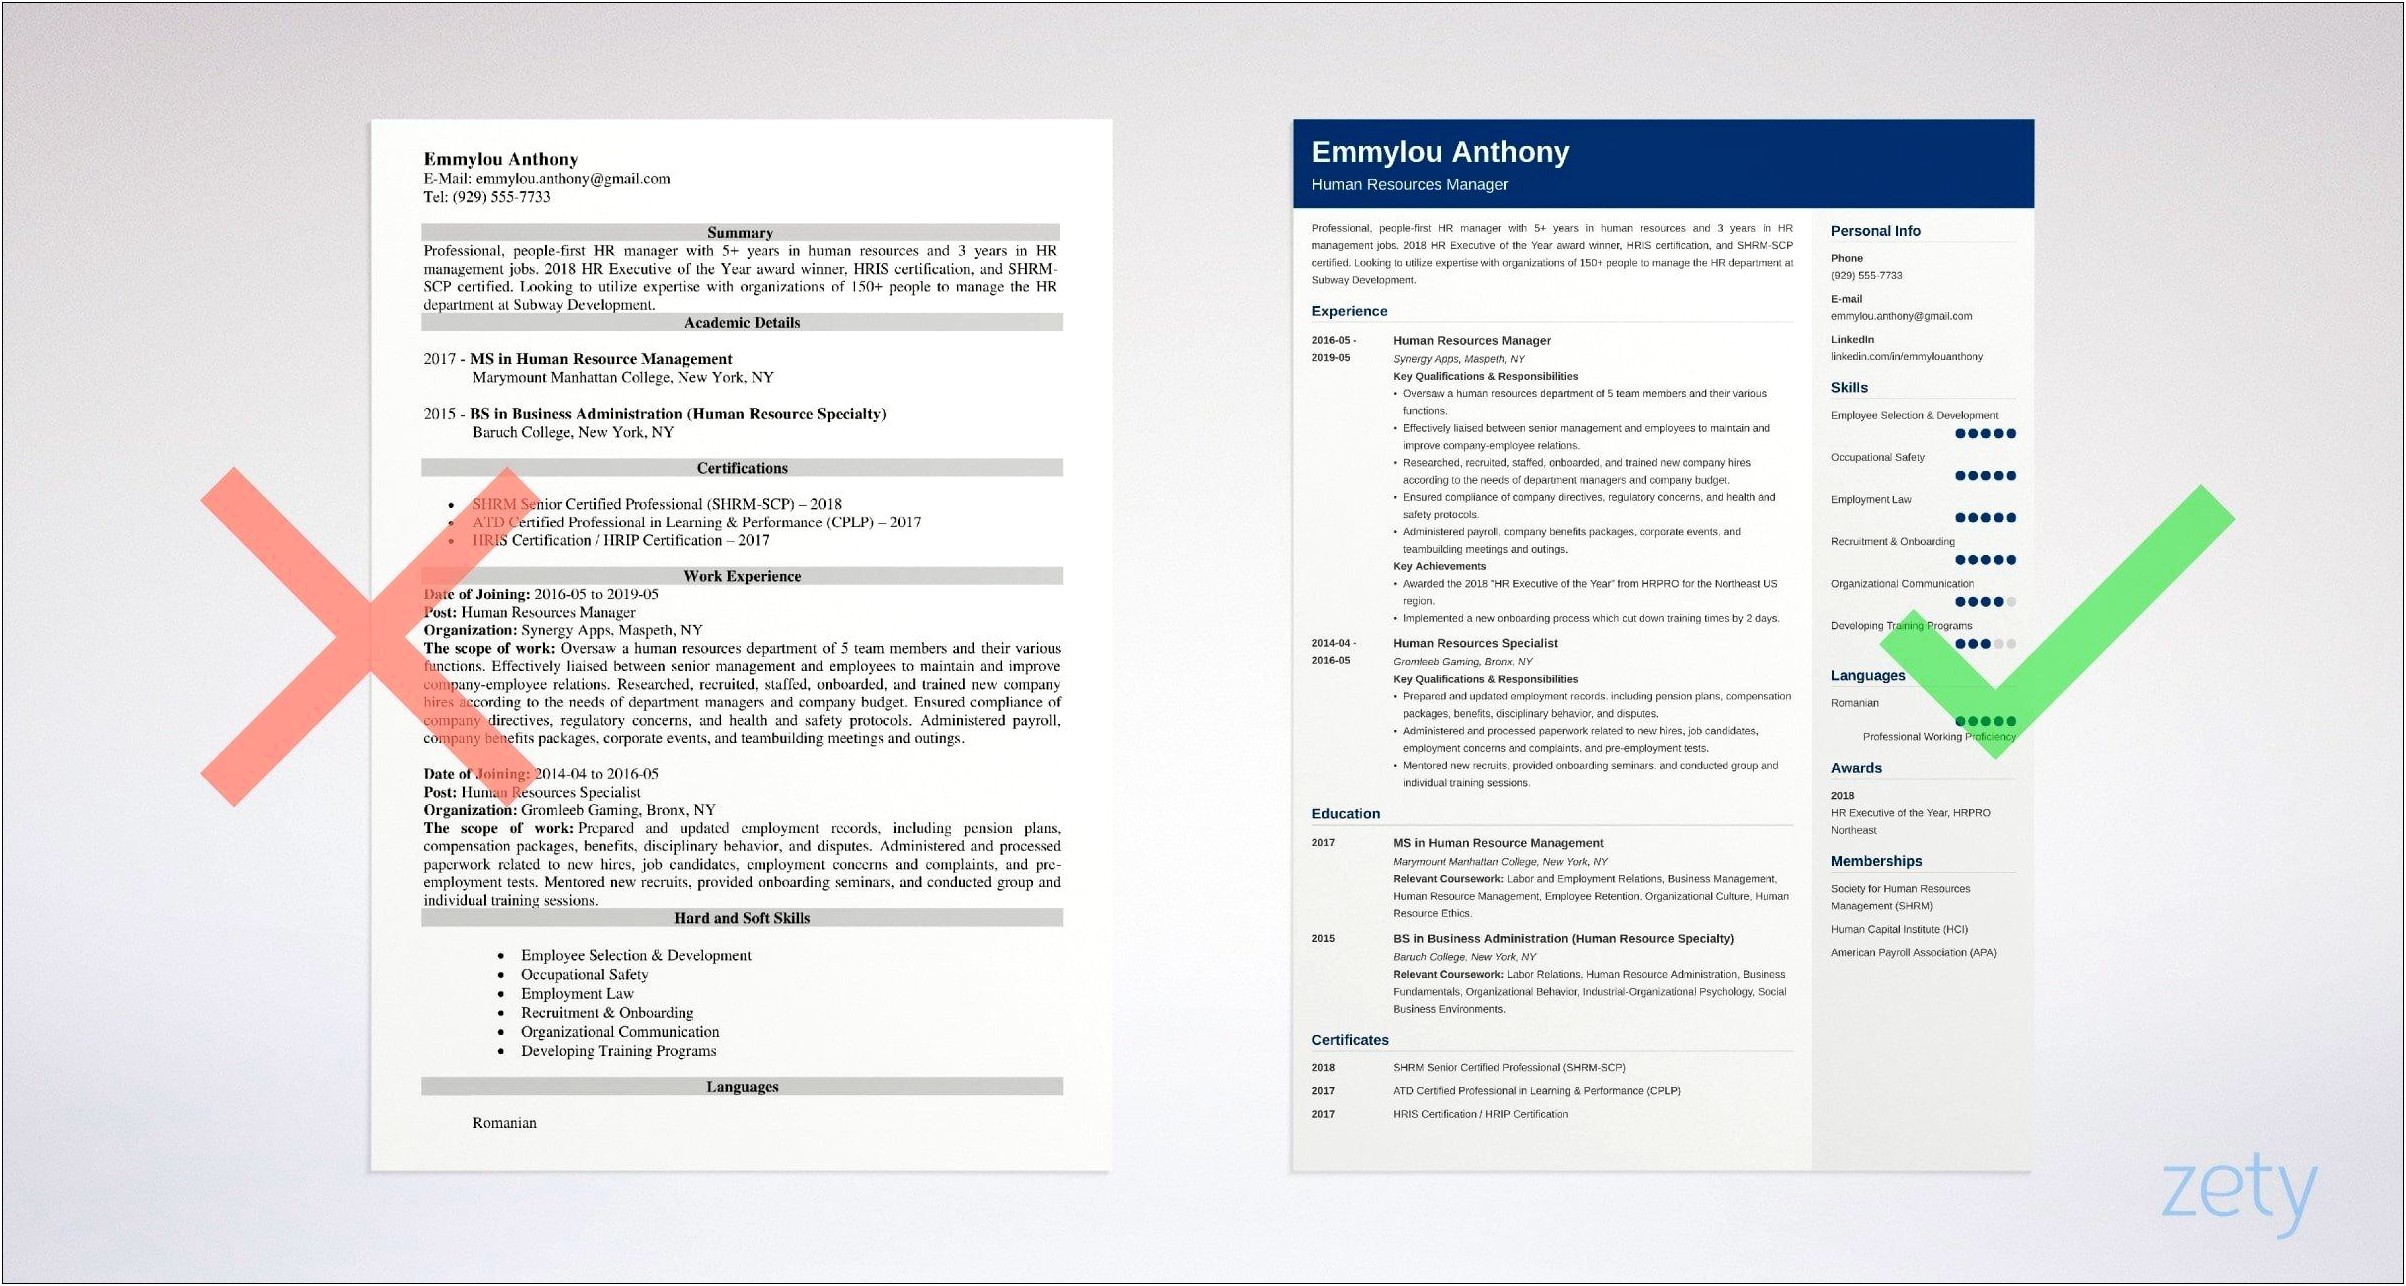 Resume Profile Samples For Human Resources